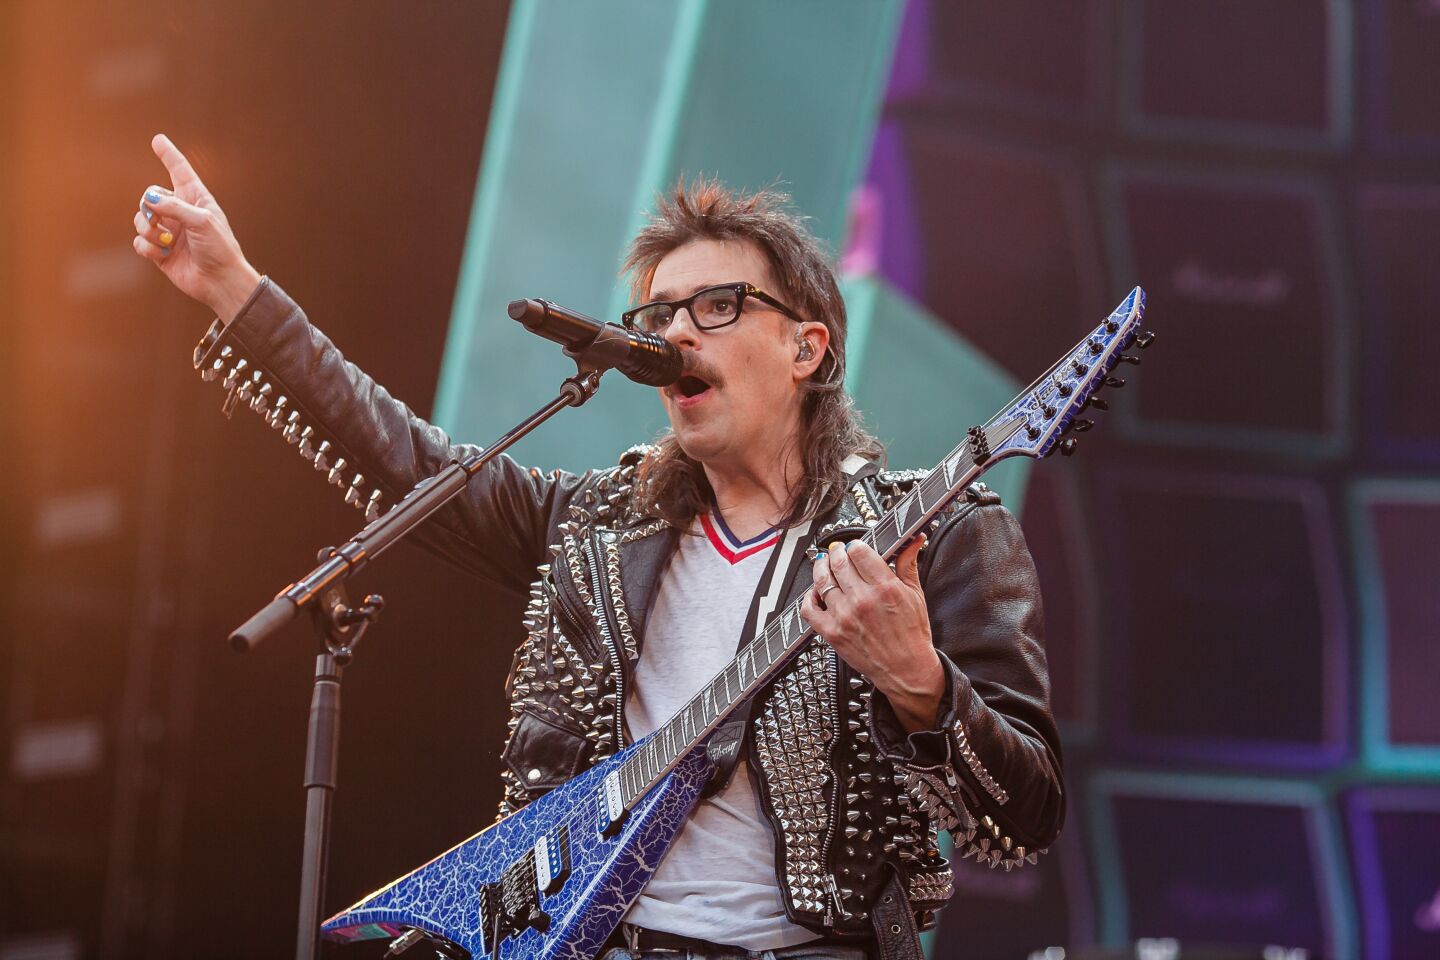 Singer Rivers Cuomo from Weezer at Petco Park during the Hella Mega Tour in downtown San Diego on August 29, 2021.